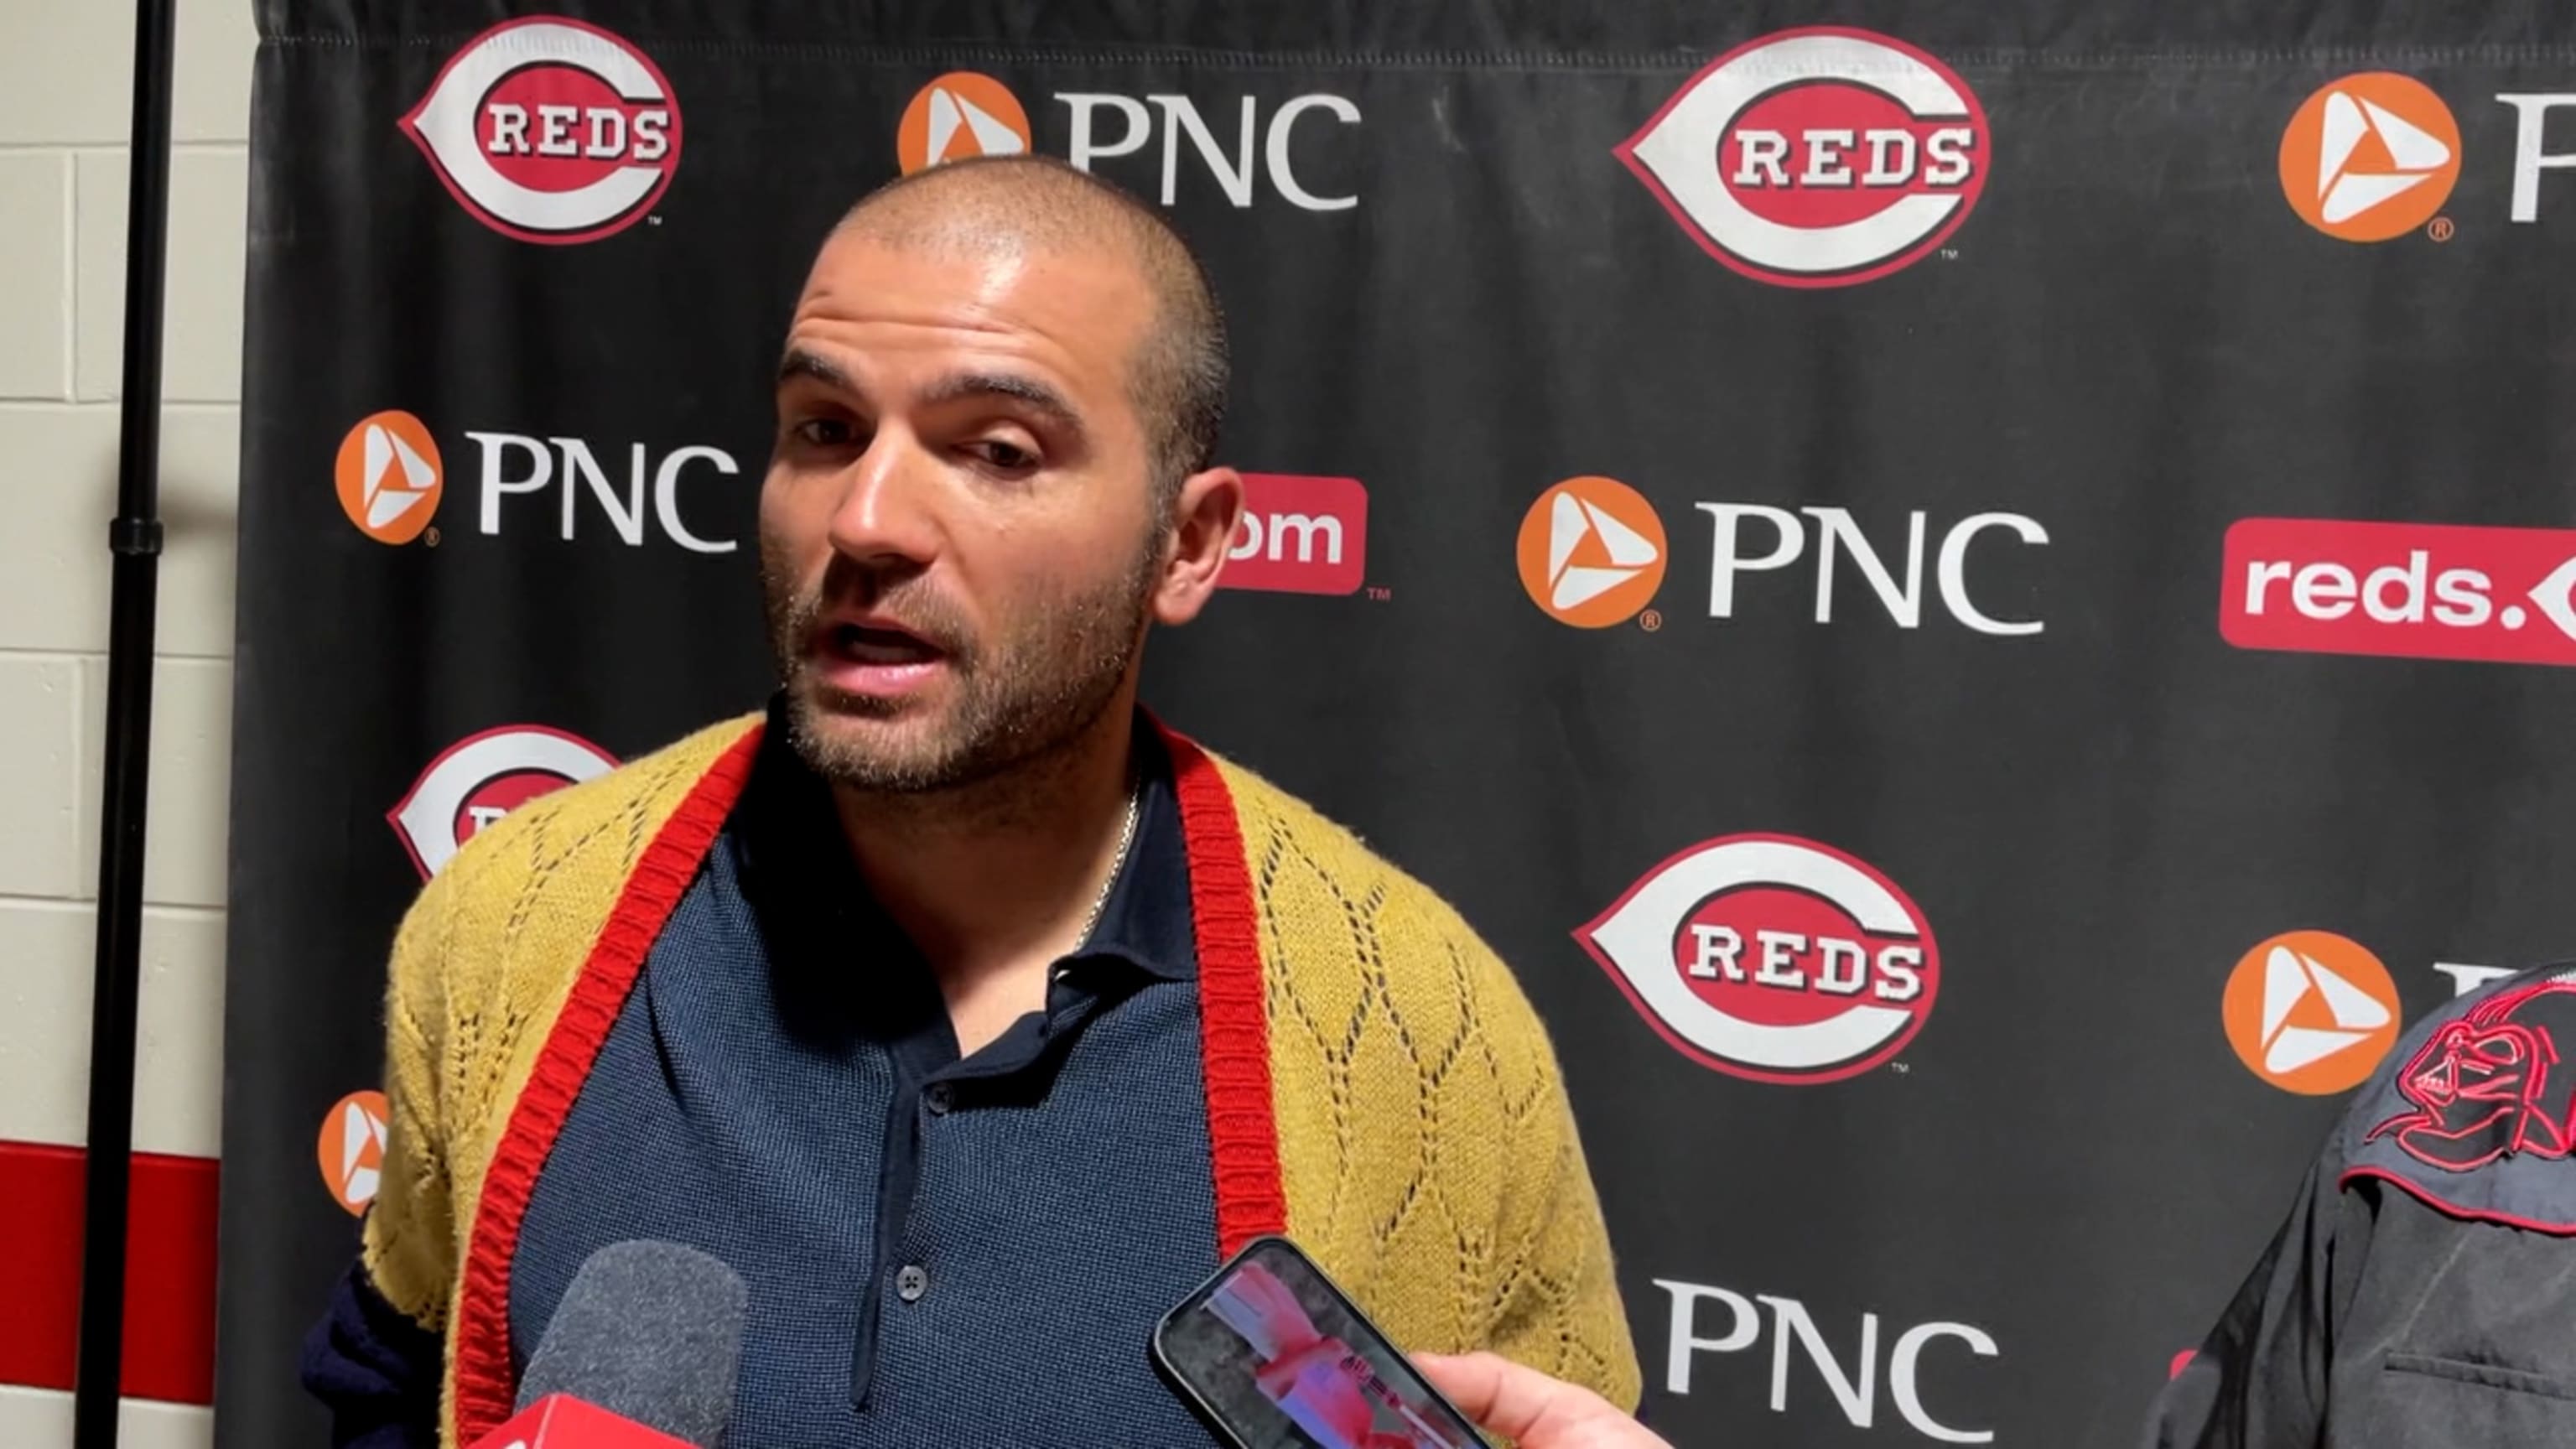 Votto signs ball for fan: 'I am sorry I didn't play the entire game